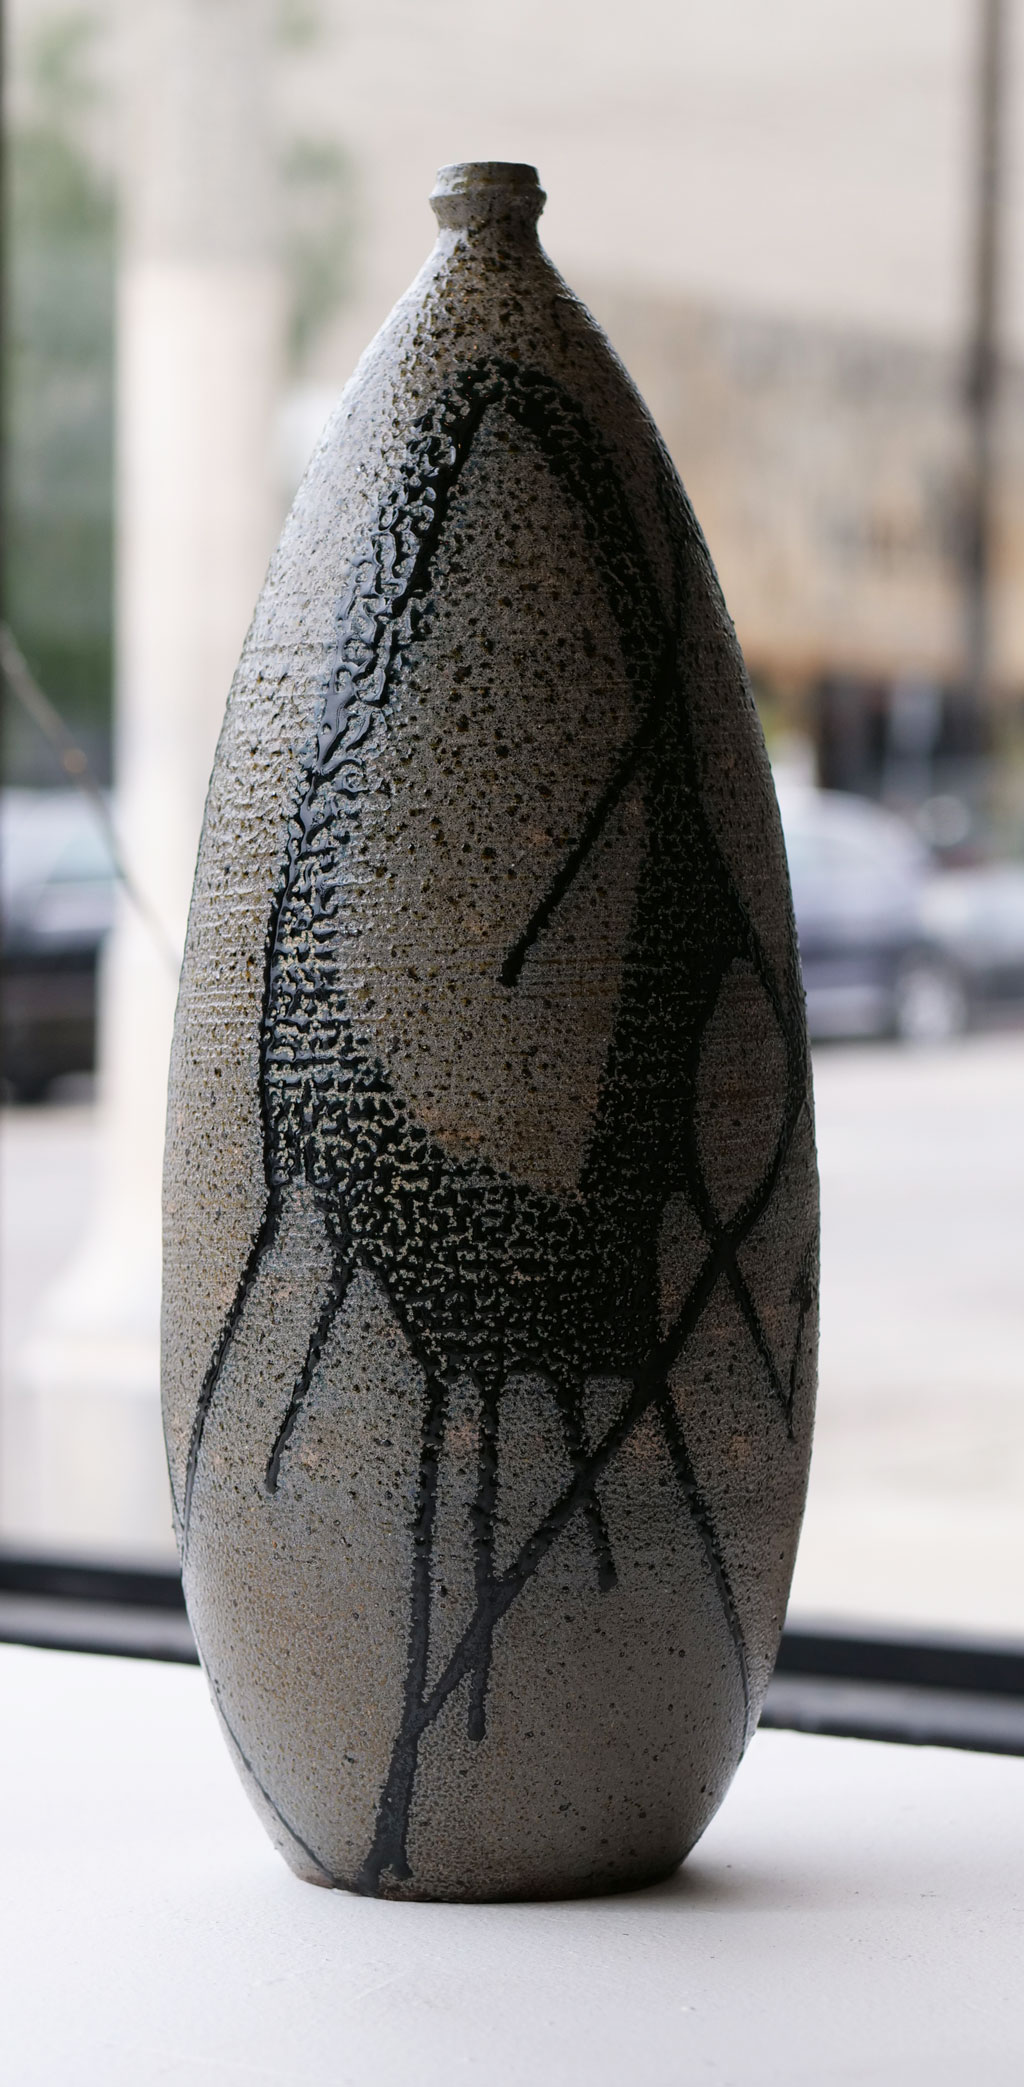 Dr. Robert Fritz, Vessel, 1960s. Salt-glazed stoneware, California Visionaries: Seminal Studio Craft, Featuring Works from the Forrest L. Merrill Collection